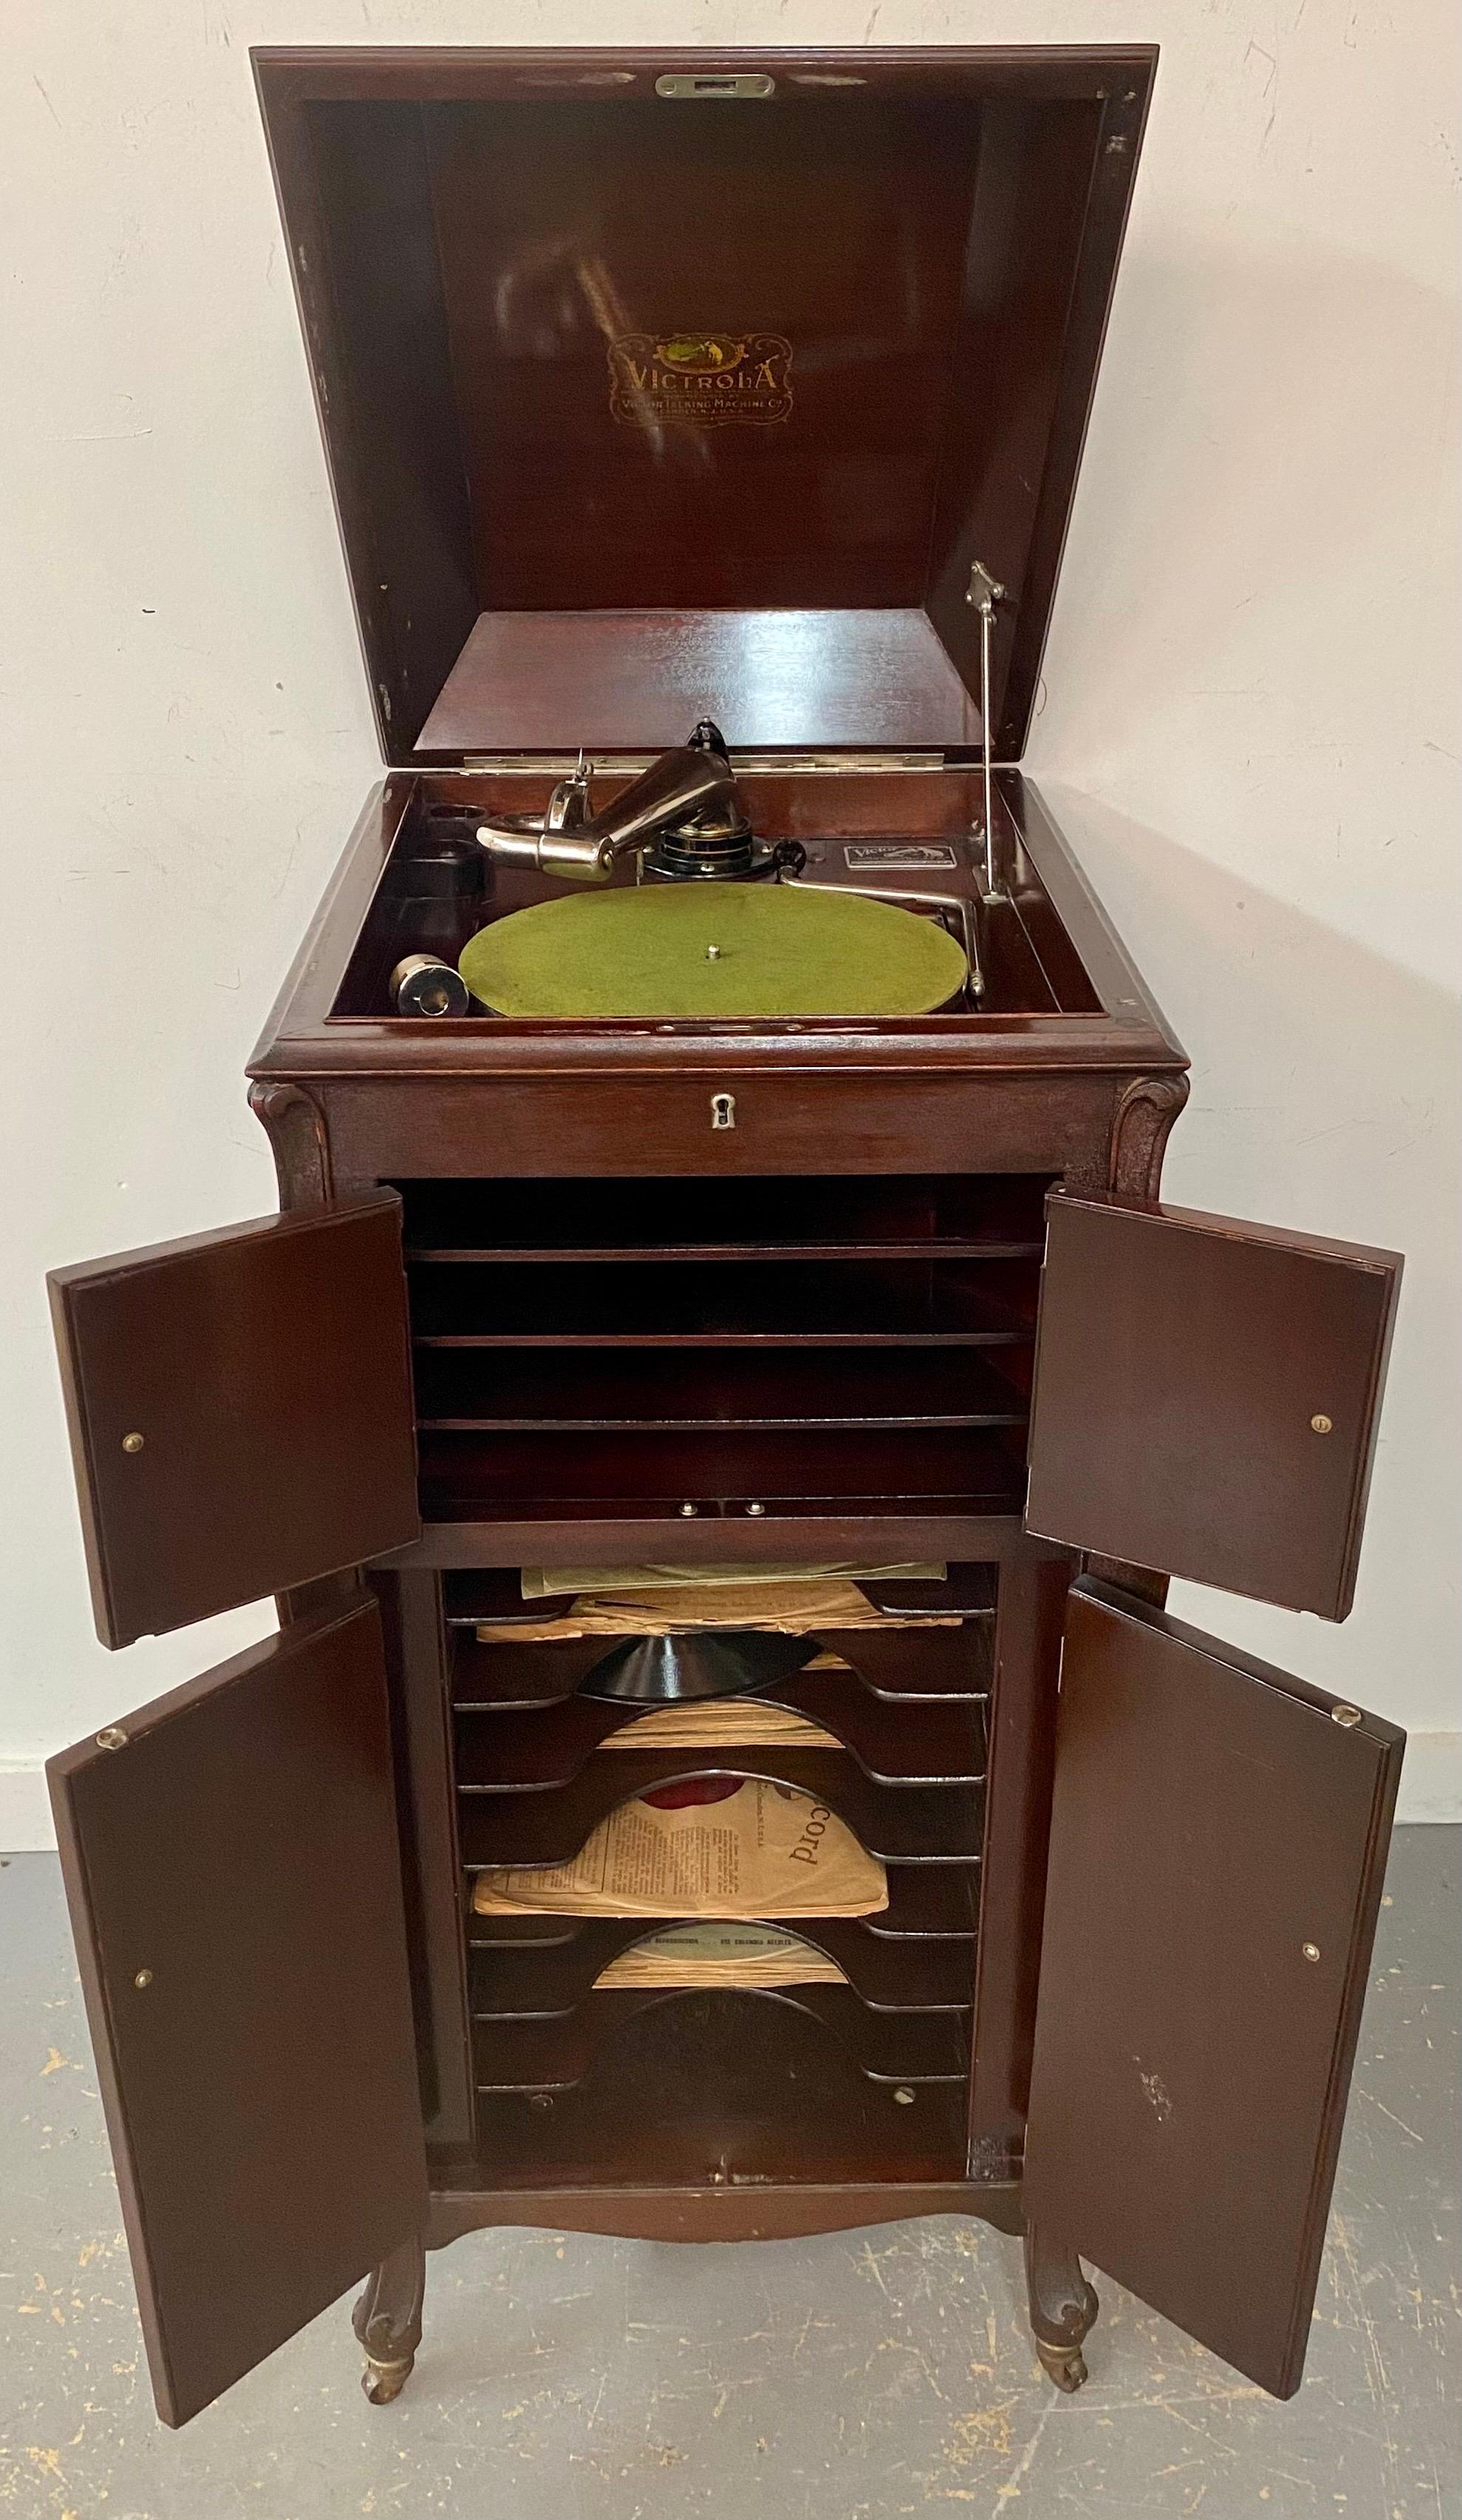 The  Antique VictorLA, a quintessential exemplar of auditory refinement, emerges in the form of the illustrious Model VV-XI phonograph Record Player, meticulously crafted by Victor Talking Machine and Co. This auditory marvel is enshrined within an